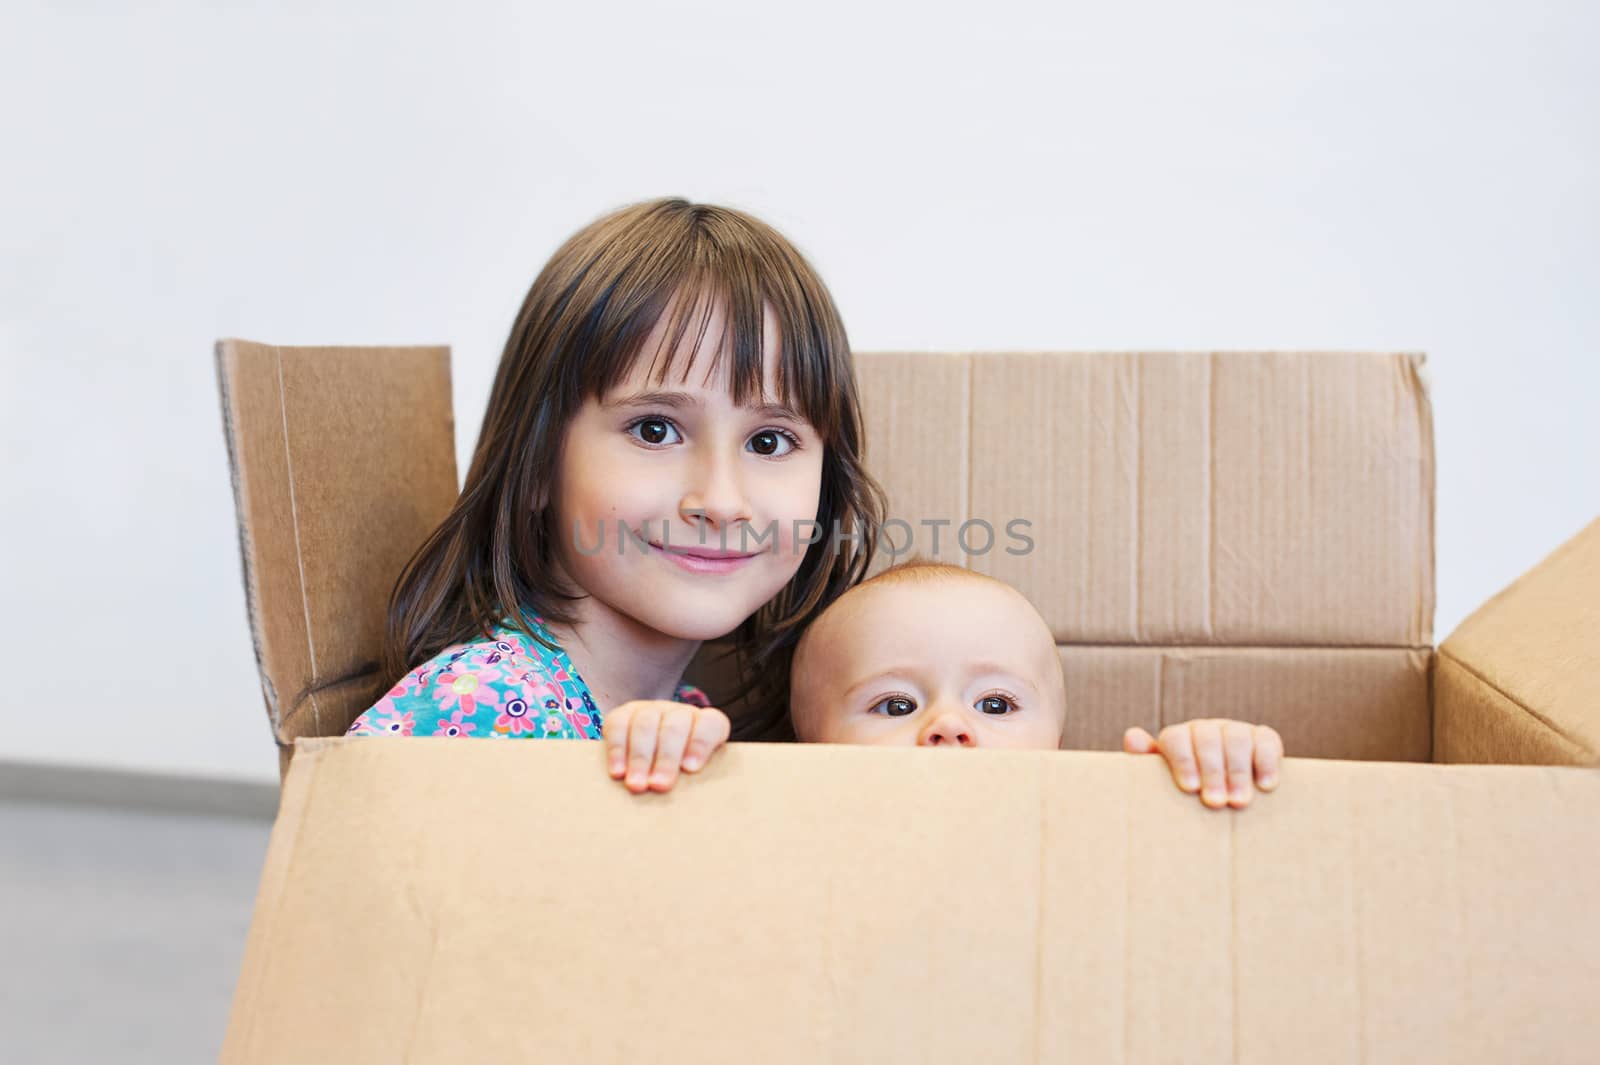 Sisters playing in a carton box  by Olinkau